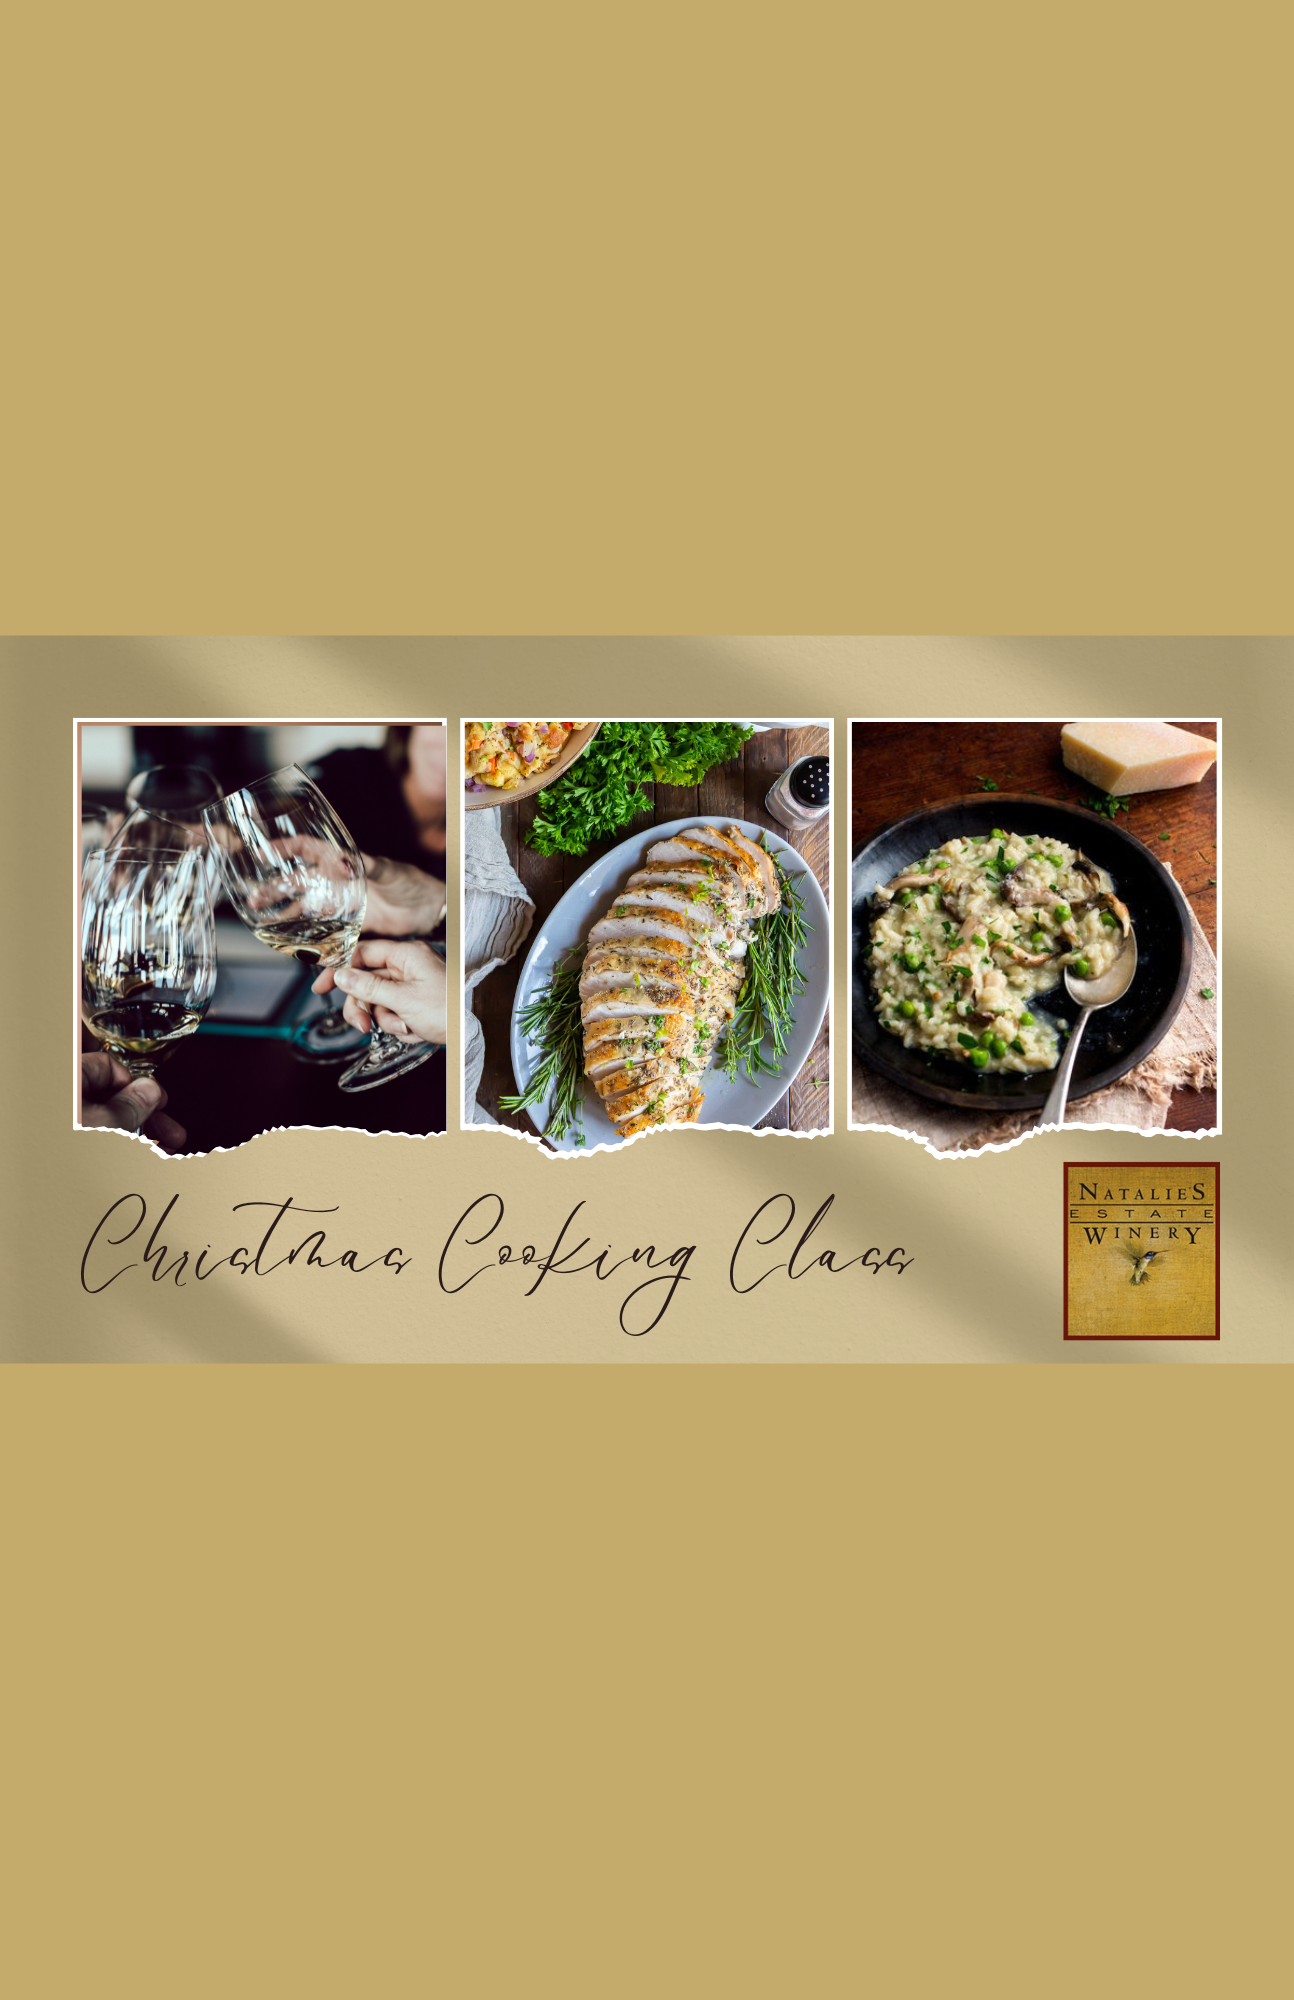 Christmas Cooking Class